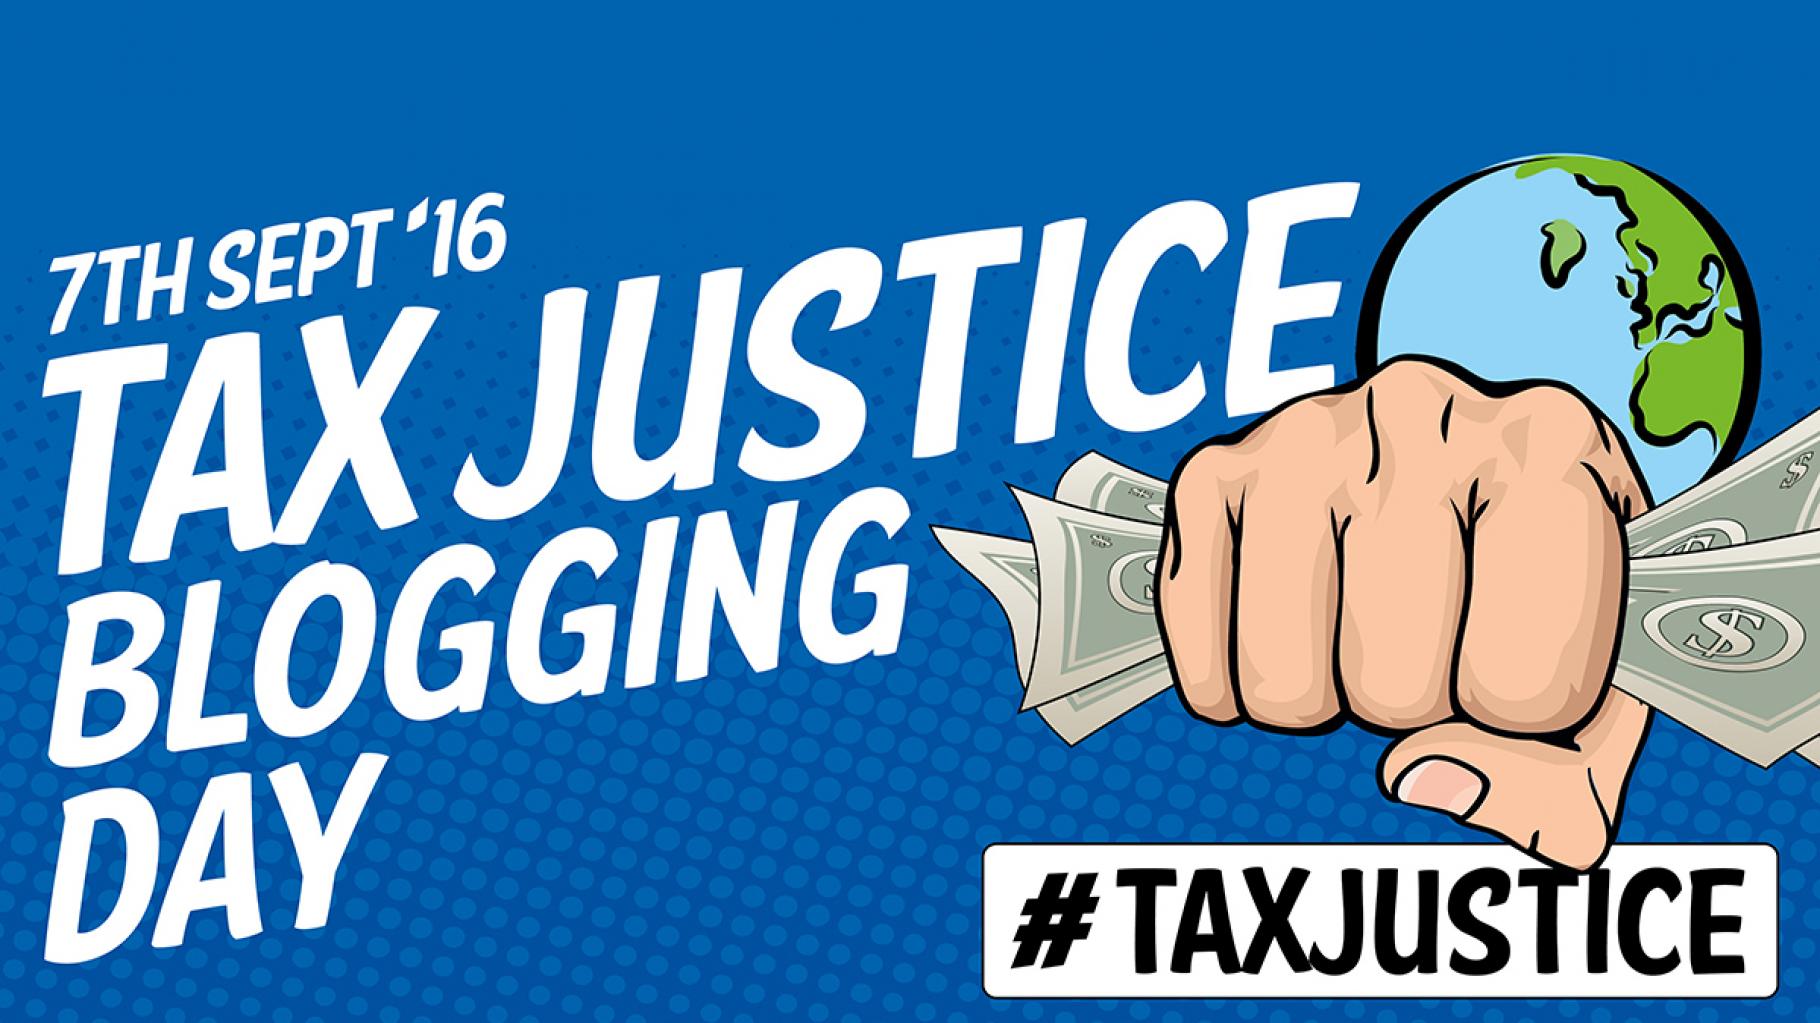 Tax Justice Blogging Day